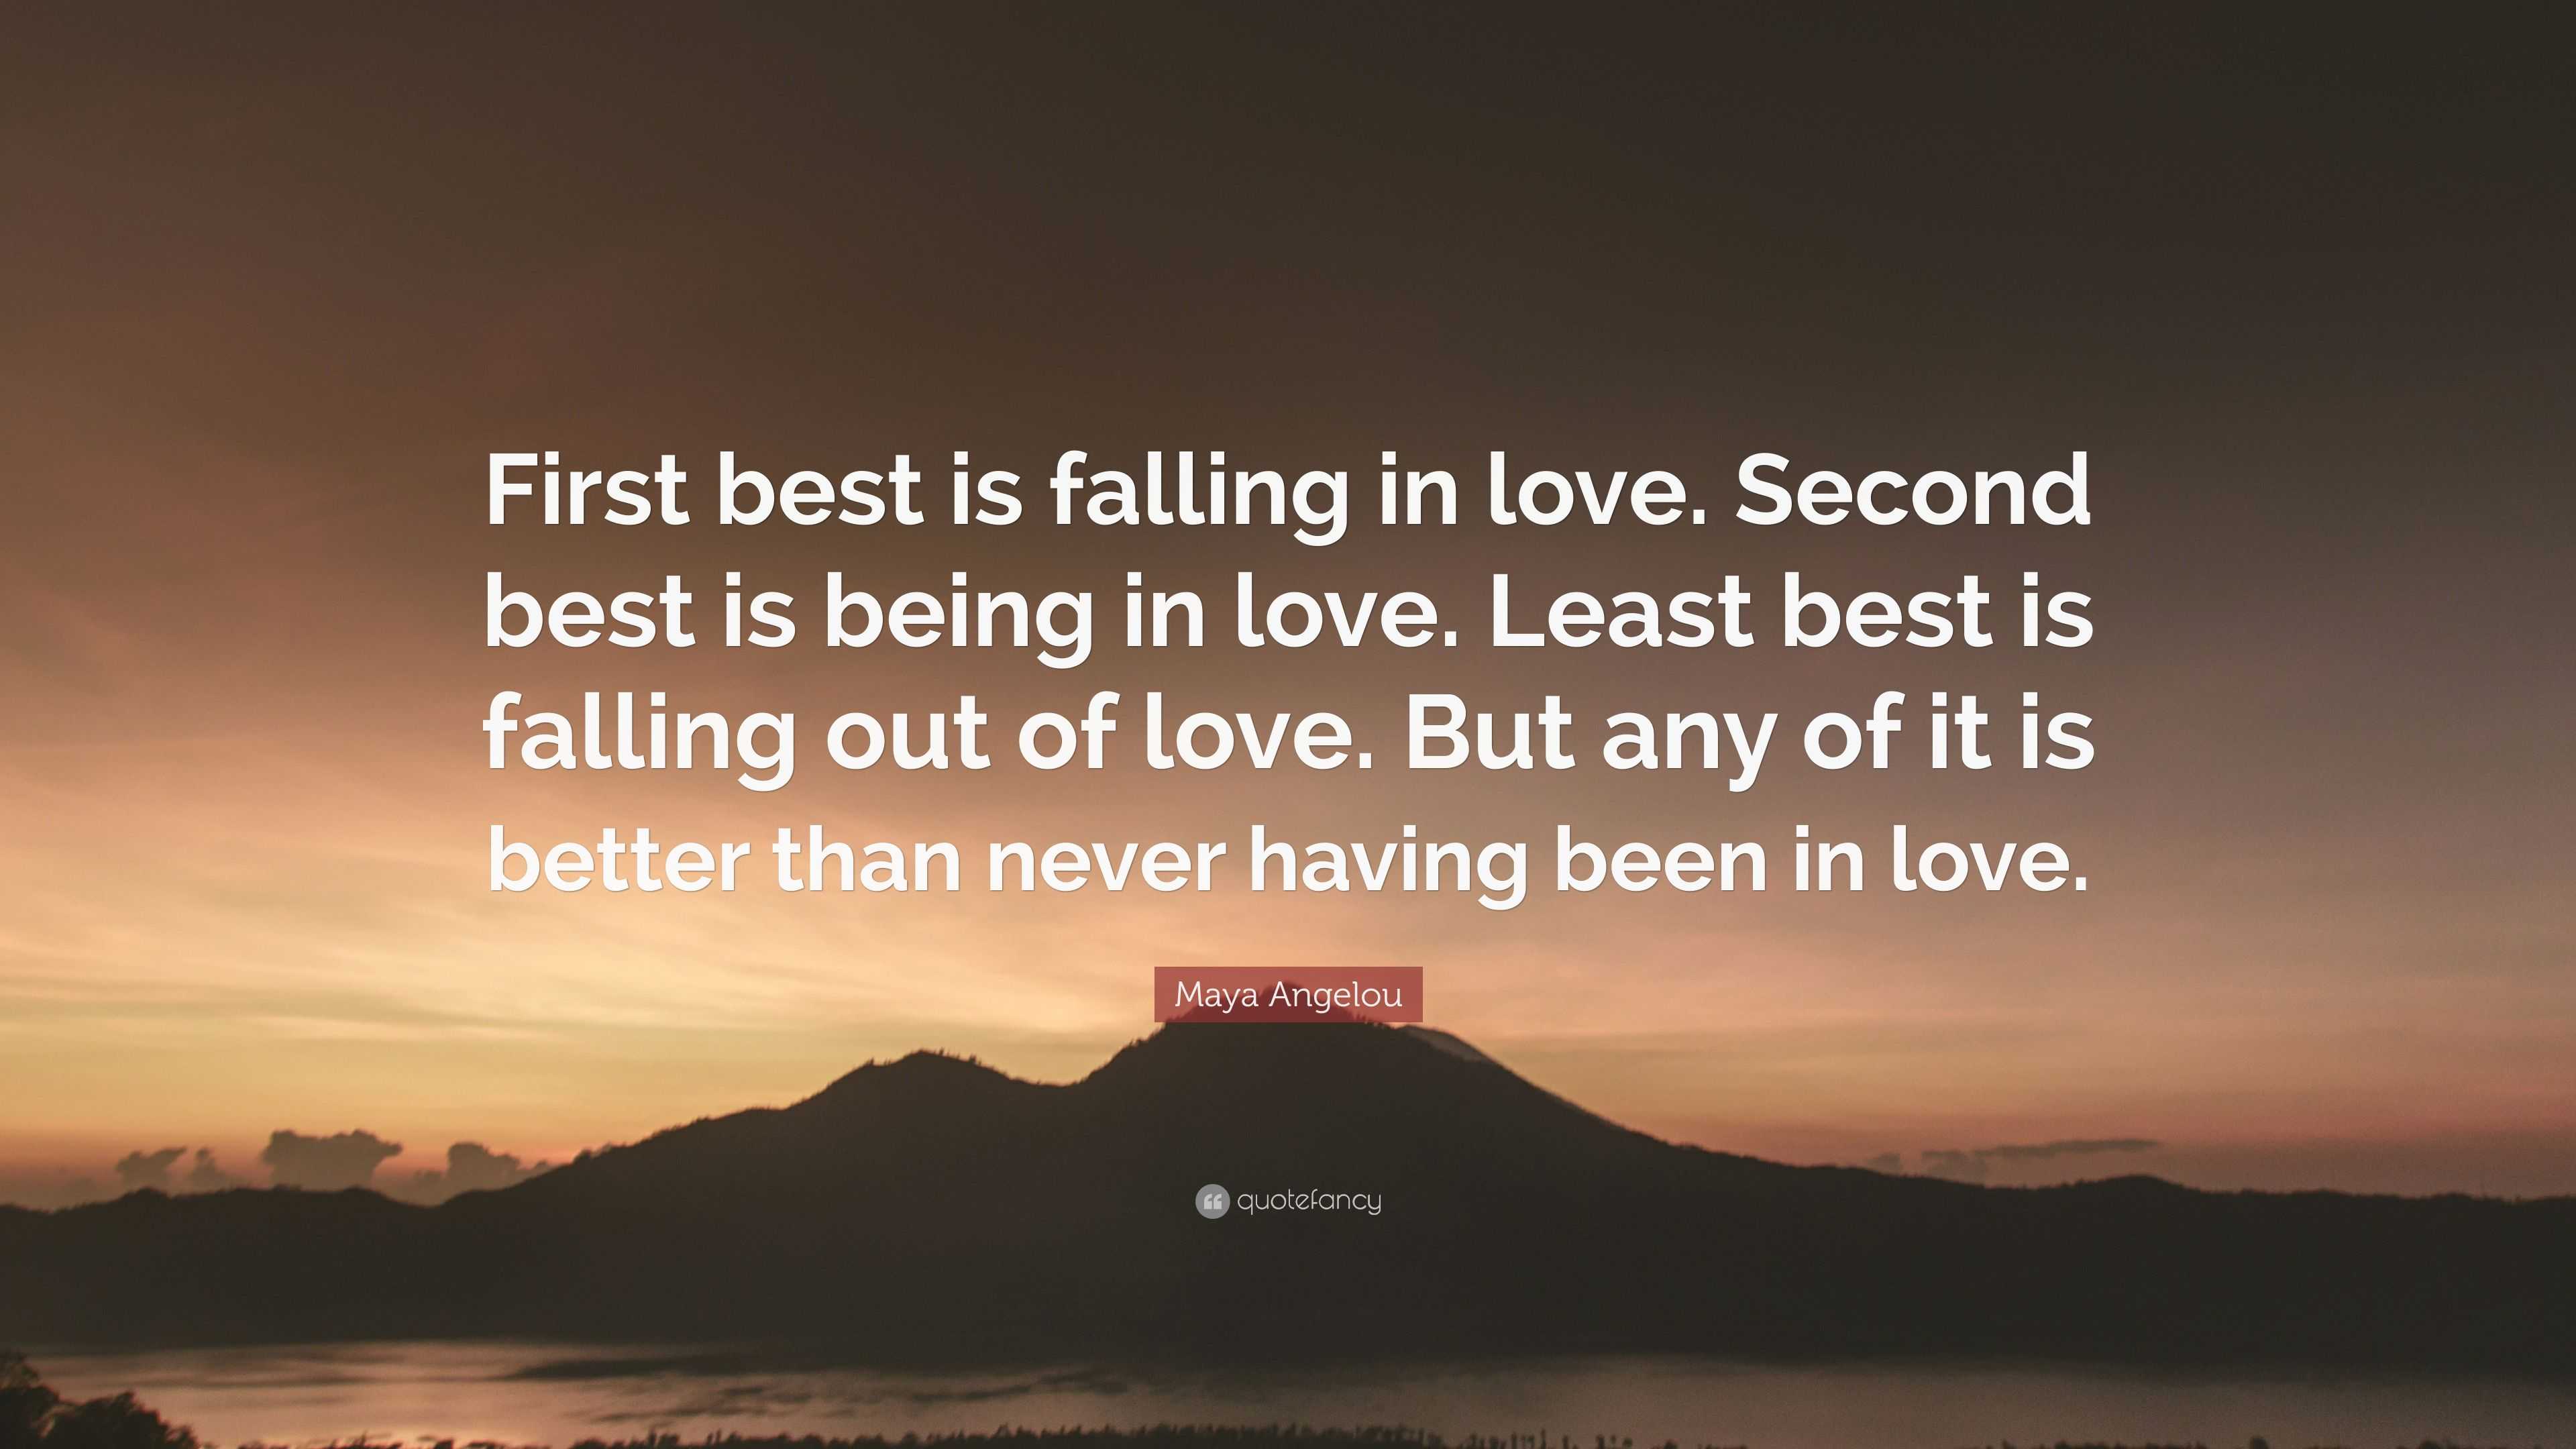 Maya Angelou Quote First Best Is Falling In Love Second Best Is Being In Love Least Best Is Falling Out Of Love But Any Of It Is Better